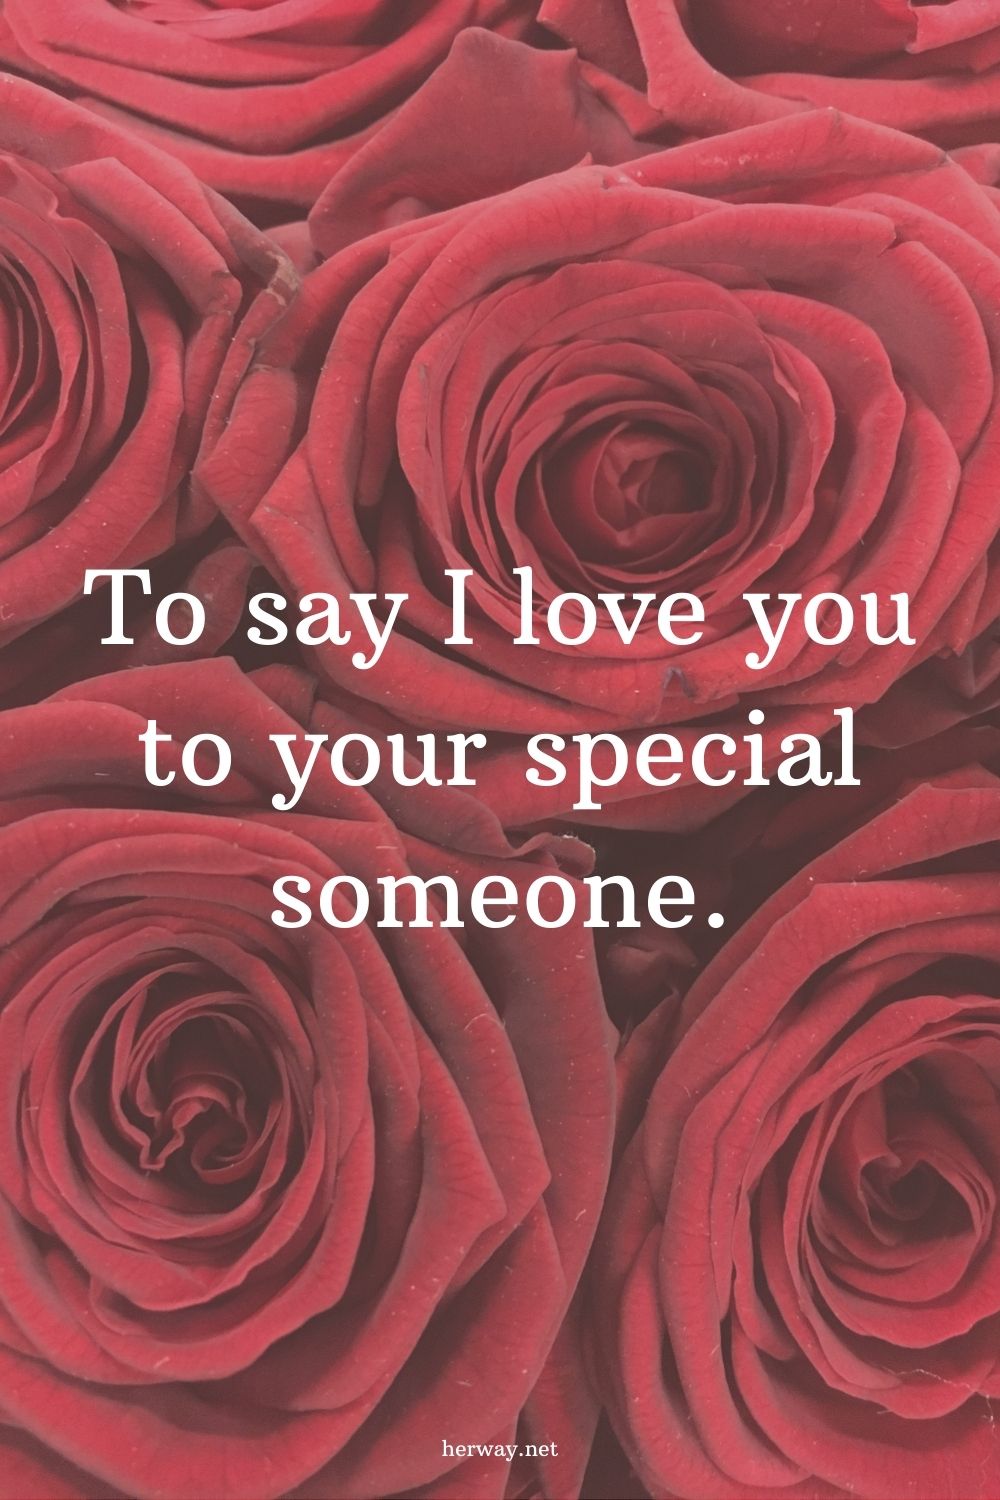 150 Creative Ways To Say 'I Love You' To Your Special Someone